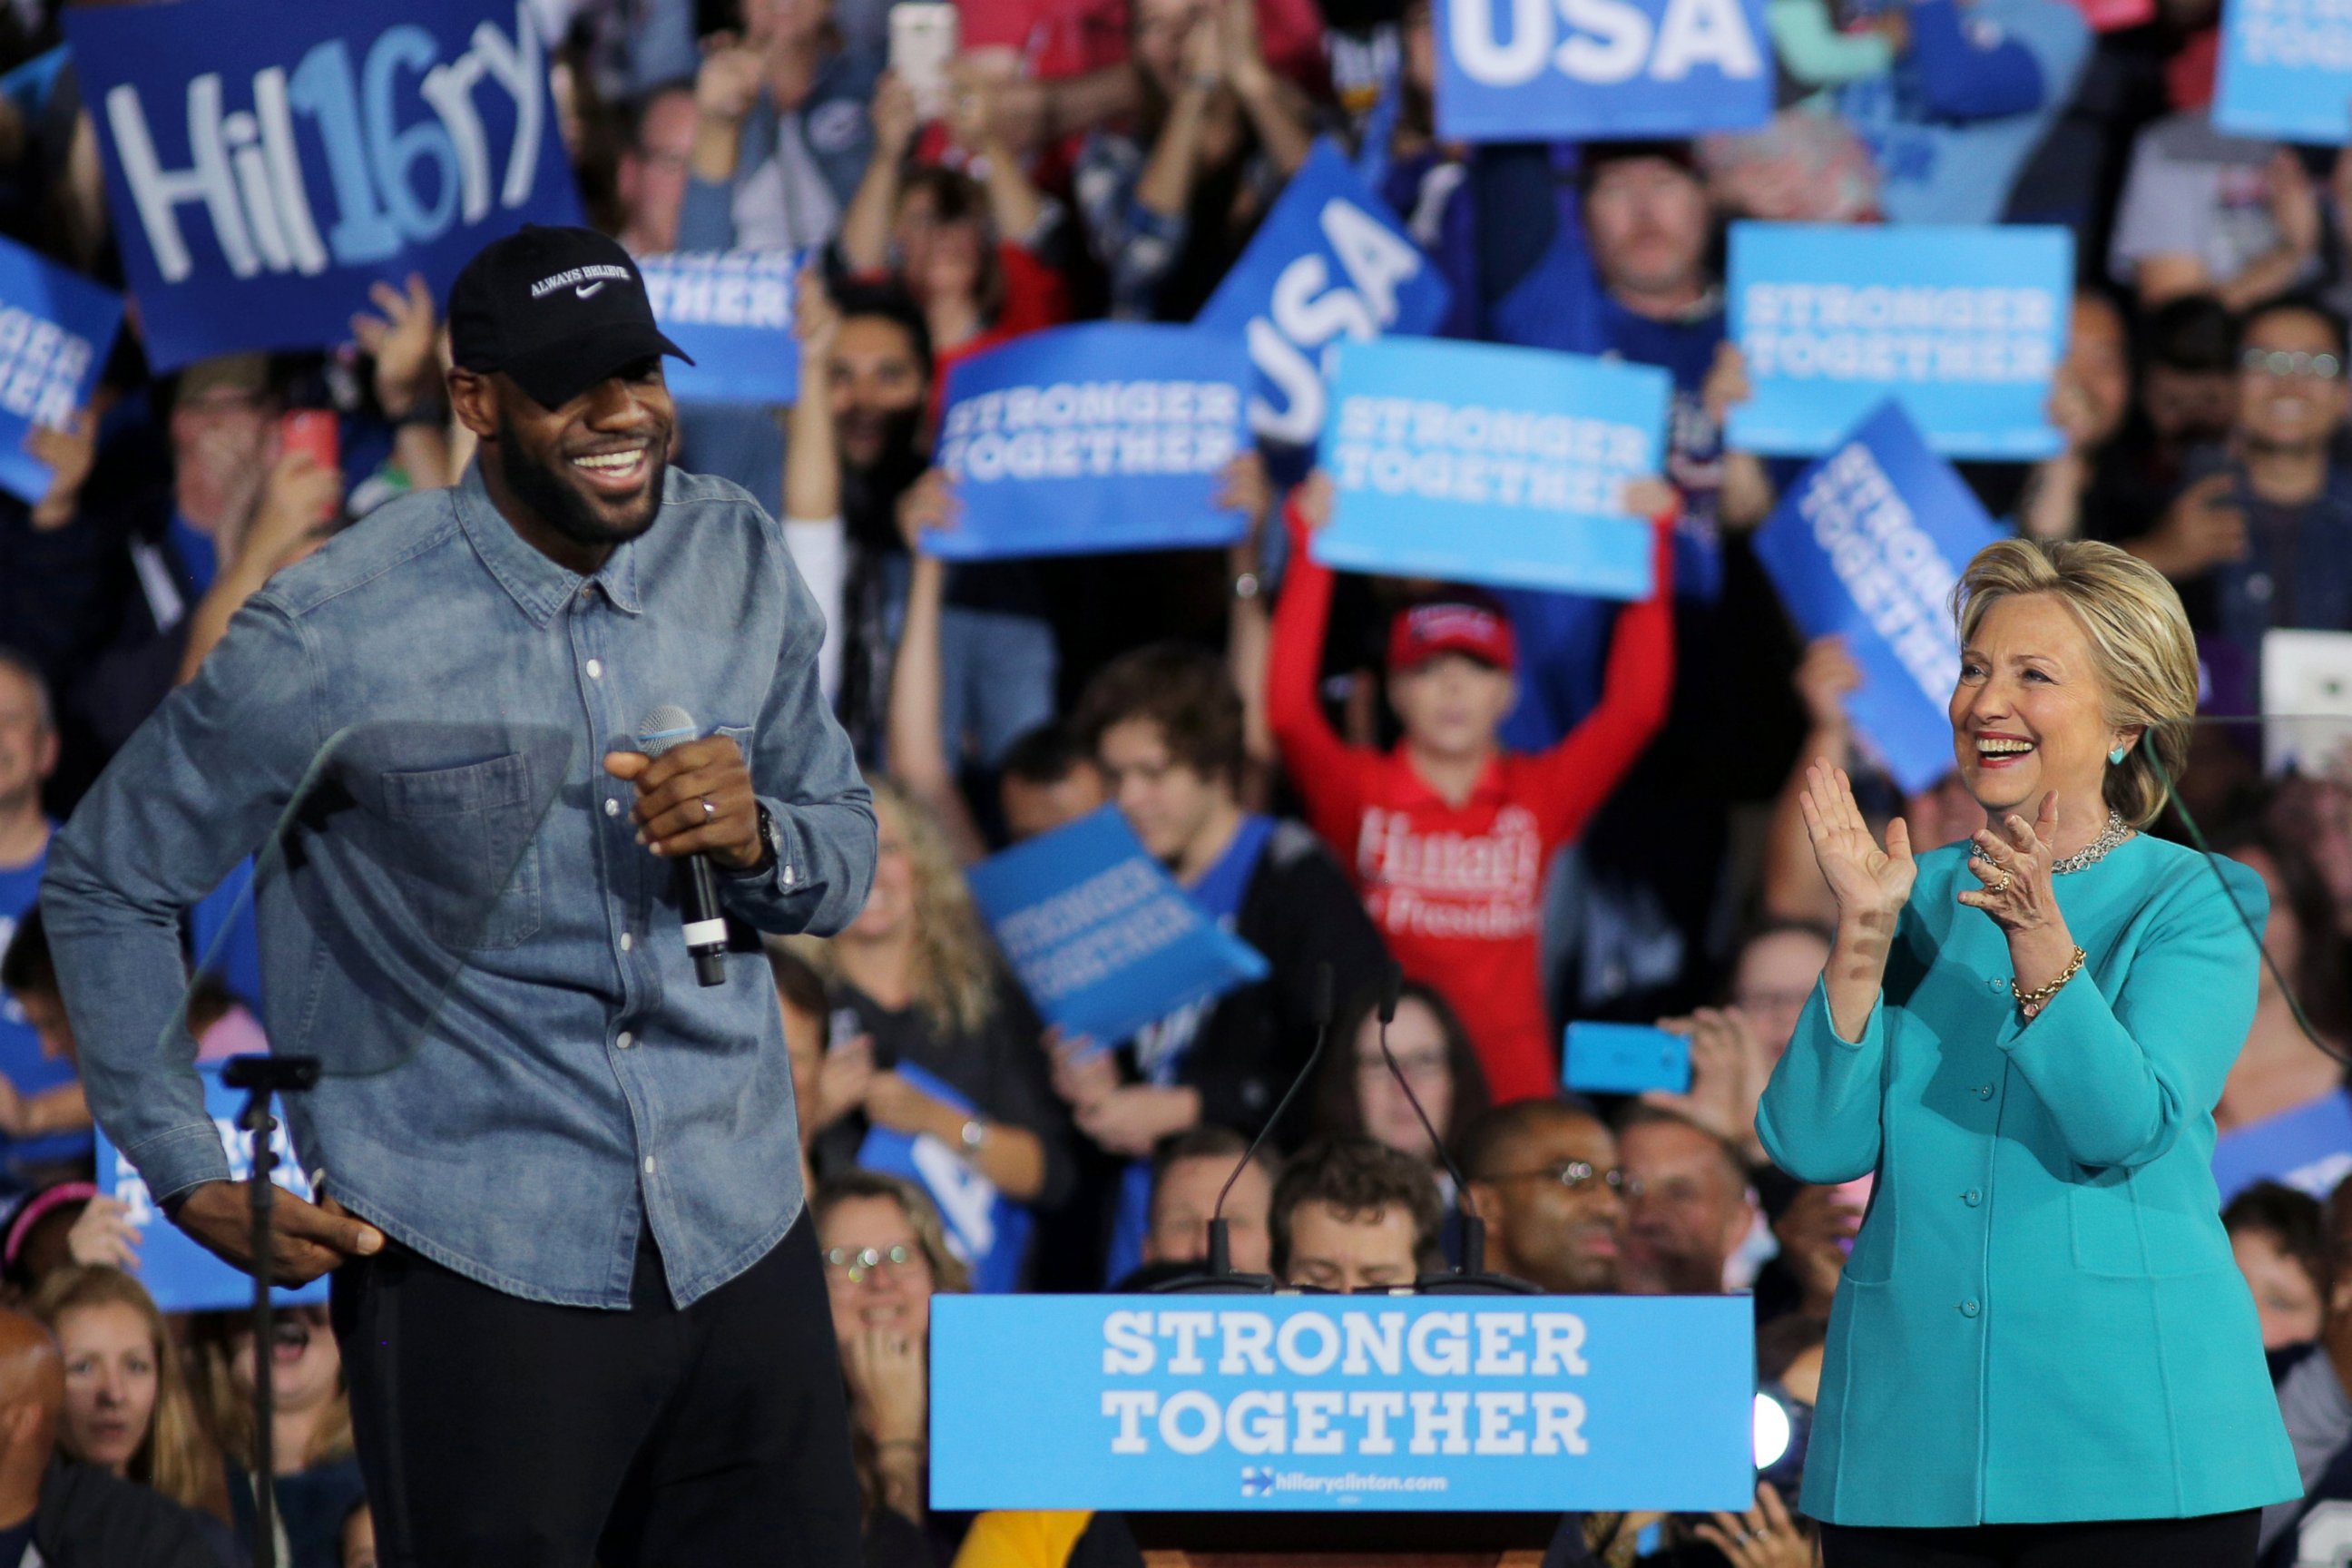 PHOTO: NBA basketball player Lebron James introduces U.S. Democratic presidential nominee Hillary Clinton during a campaign rally in Cleveland, Nov. 6, 2016.